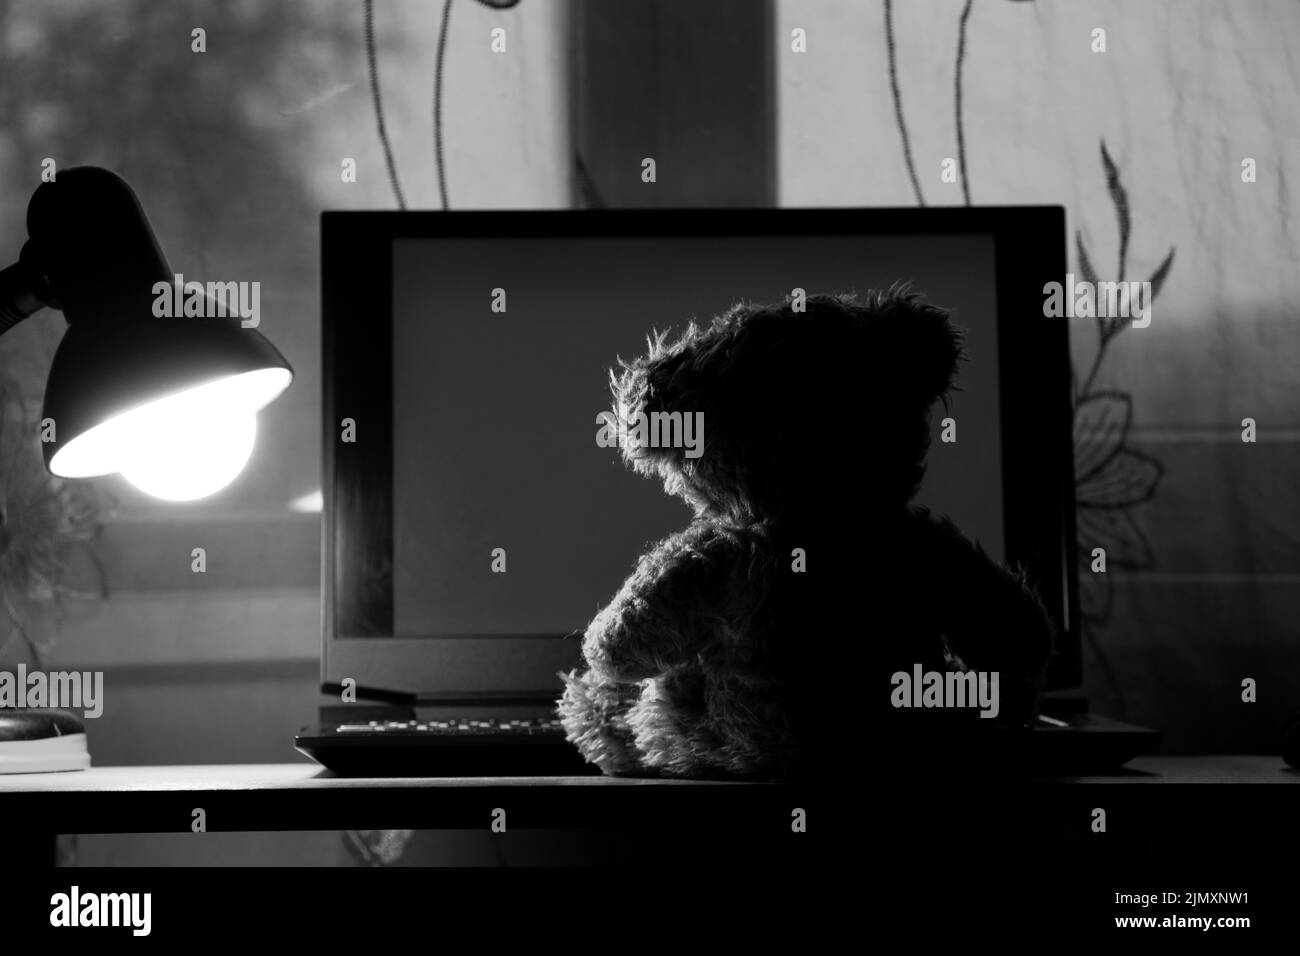 teddy bear for children sits carrying a laptop on the table, carrying a table lamp in the bedrooms at night, carrying windows, loneliness, joy in a la Stock Photo